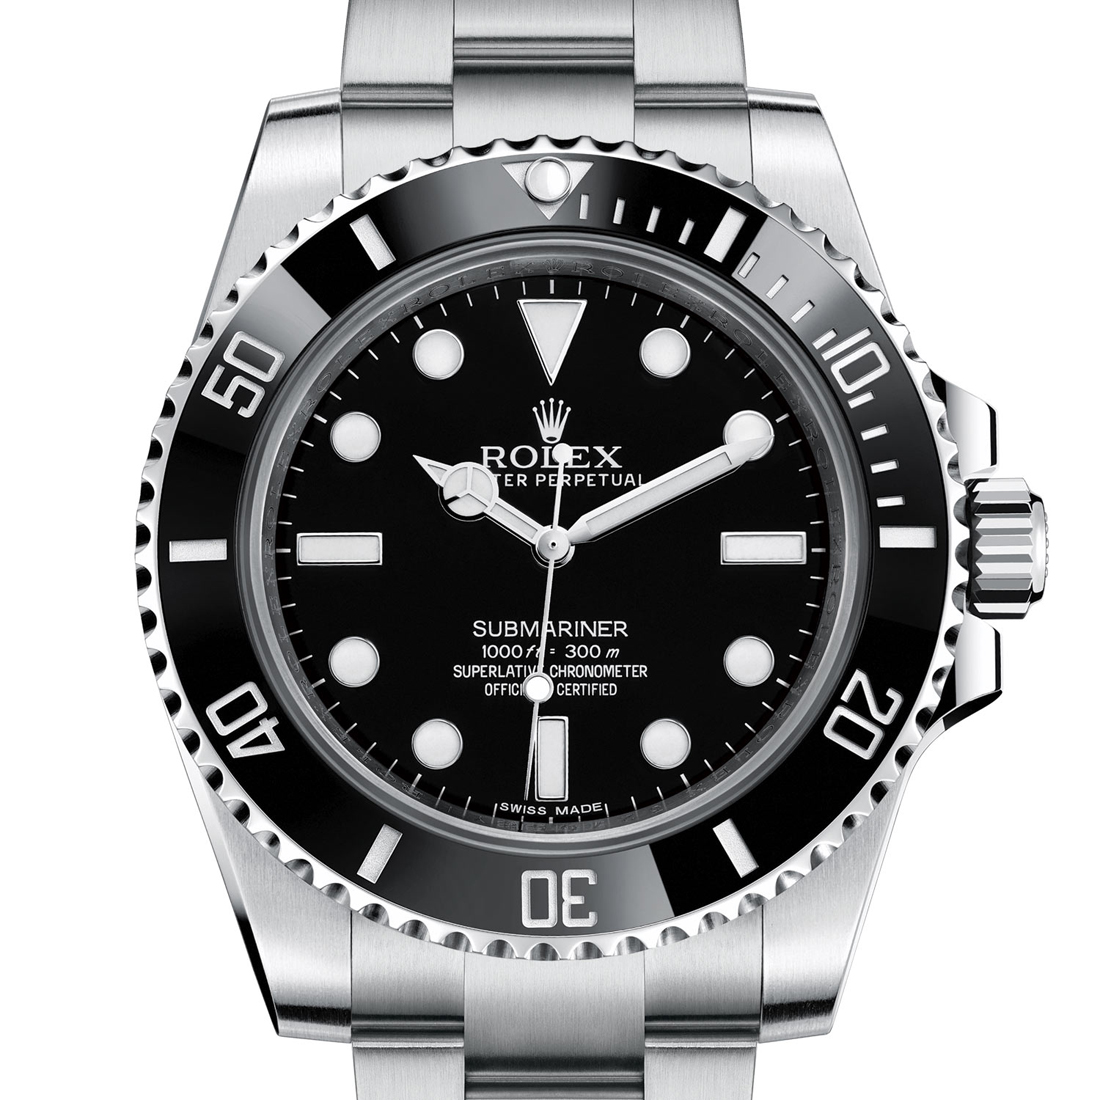 OYSTER PERPETUAL SUBMARINER (114060 